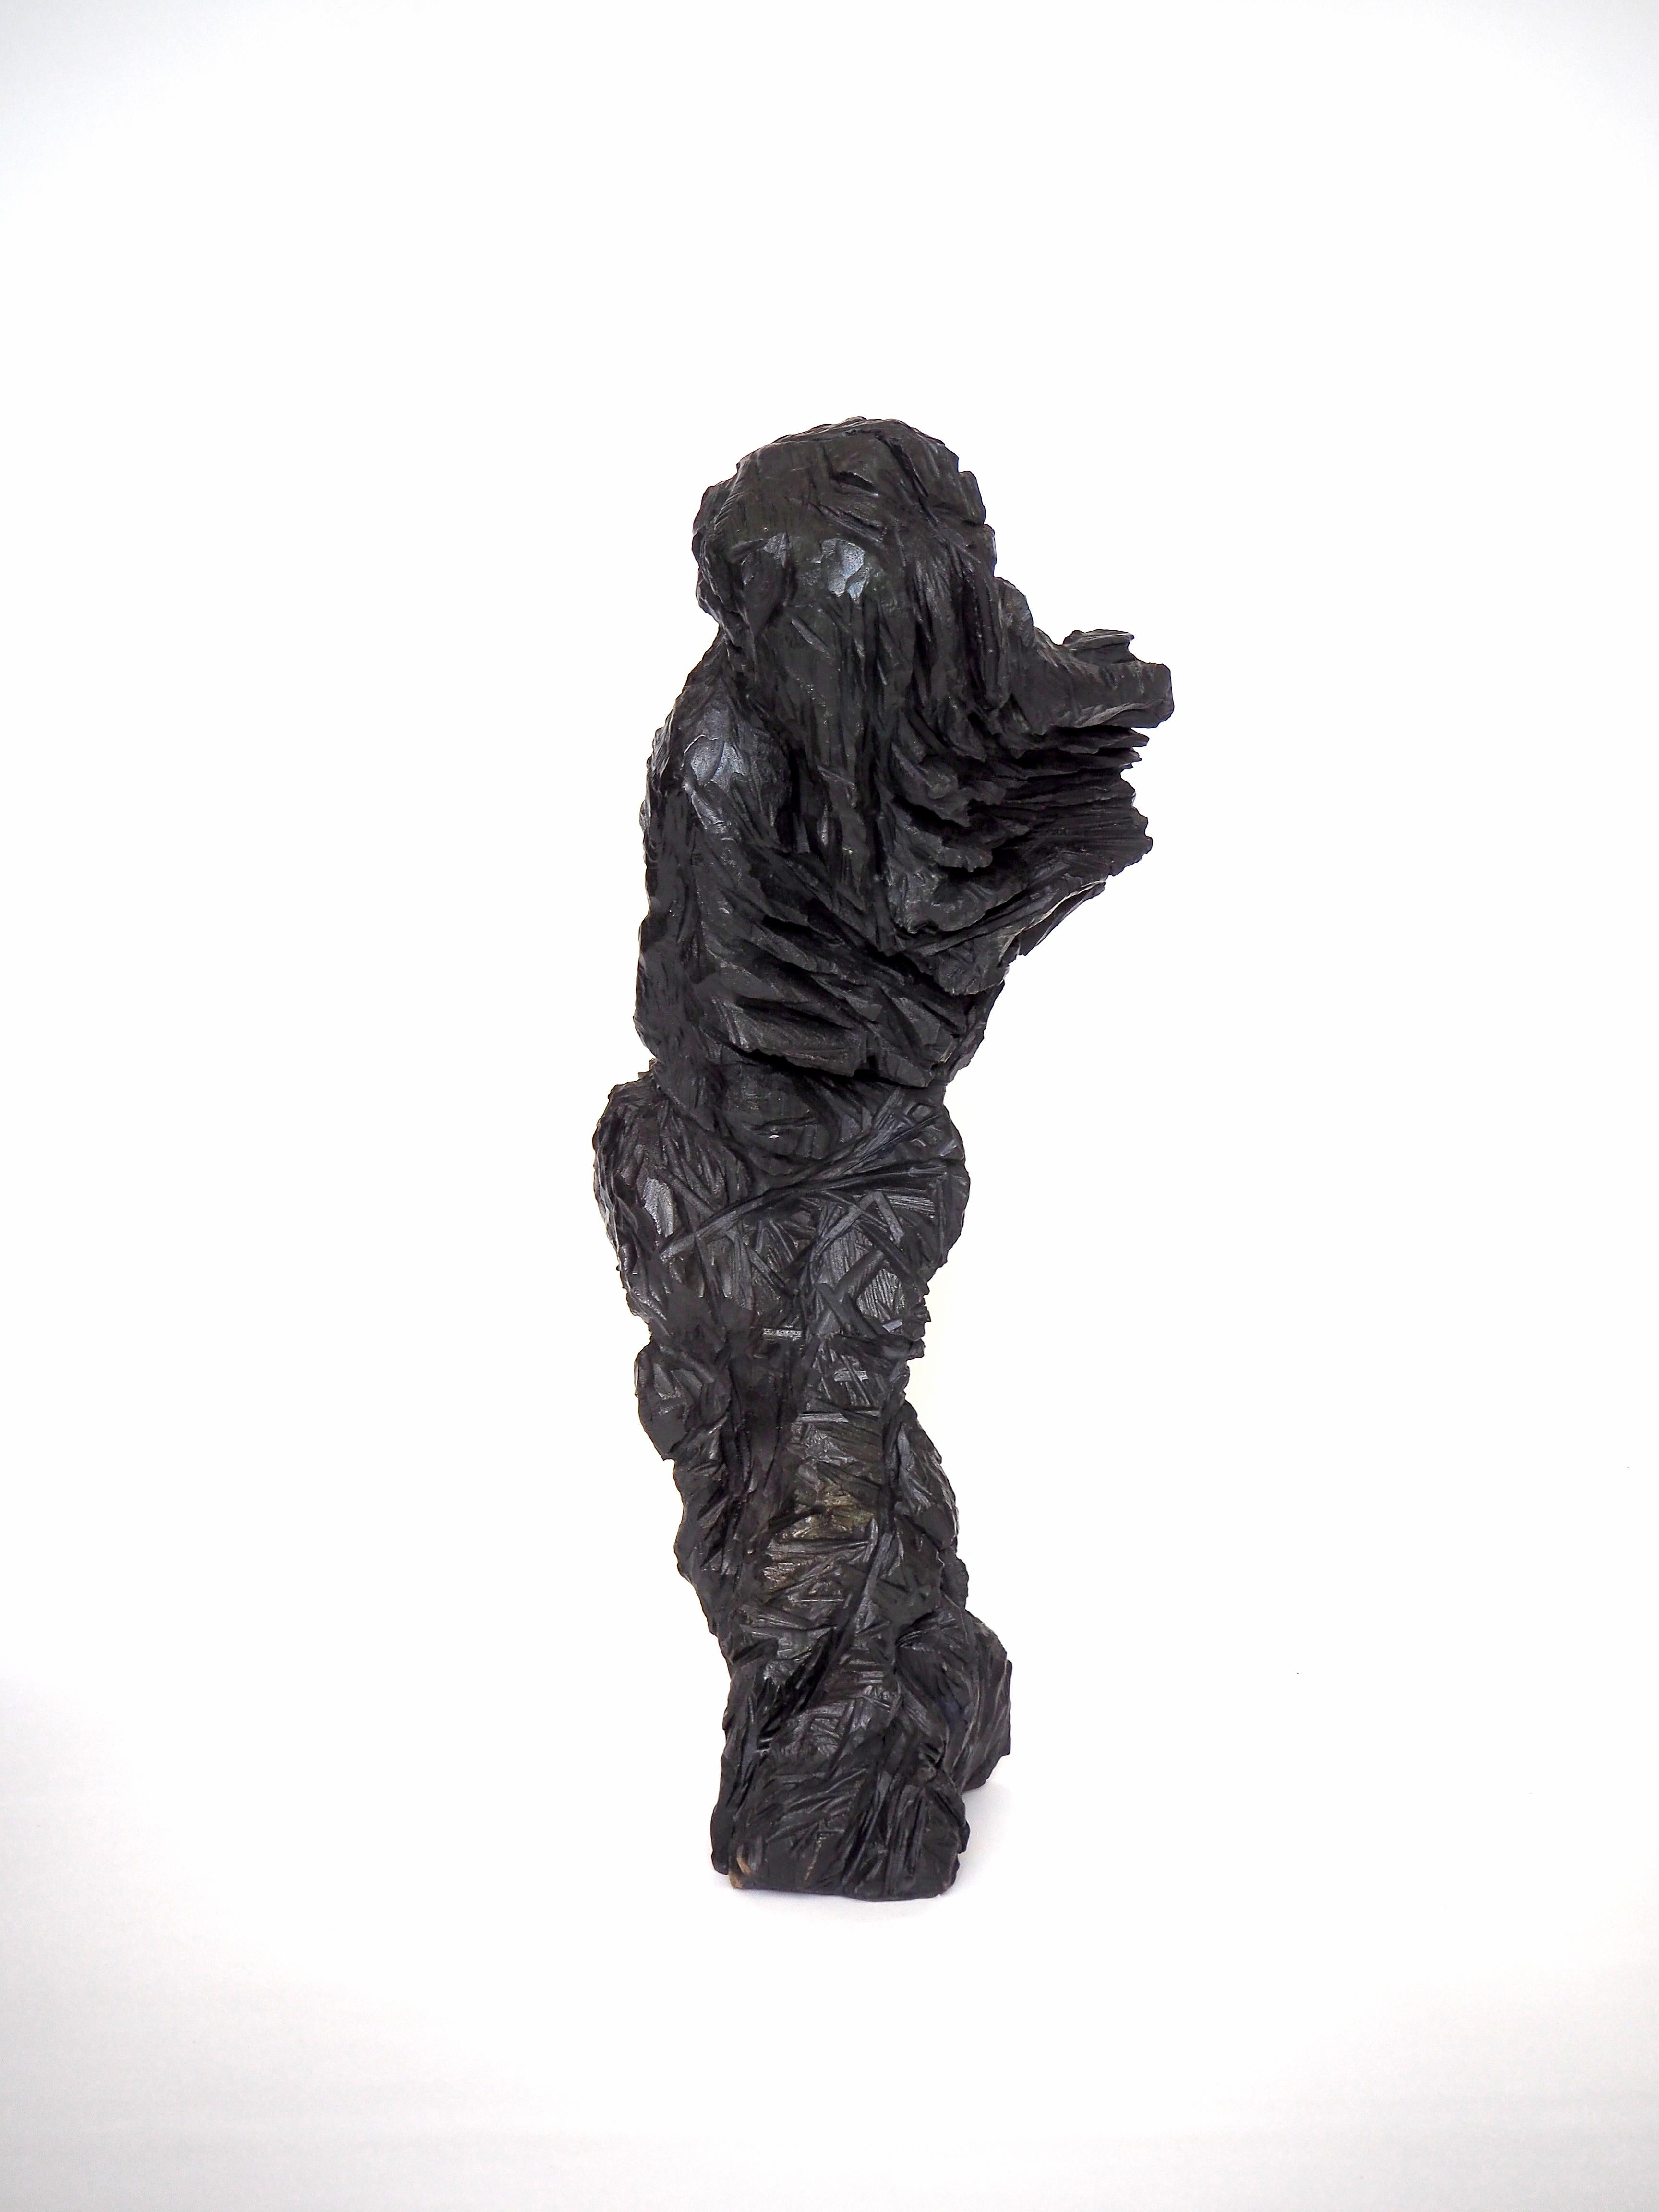 The Other, 2018, is a figural form of a being in motion, originally carved from a single piece of English oak and then cast into bronze. 

The sculpture is part of a body of works that explore the spiritual state of seeking and understanding of